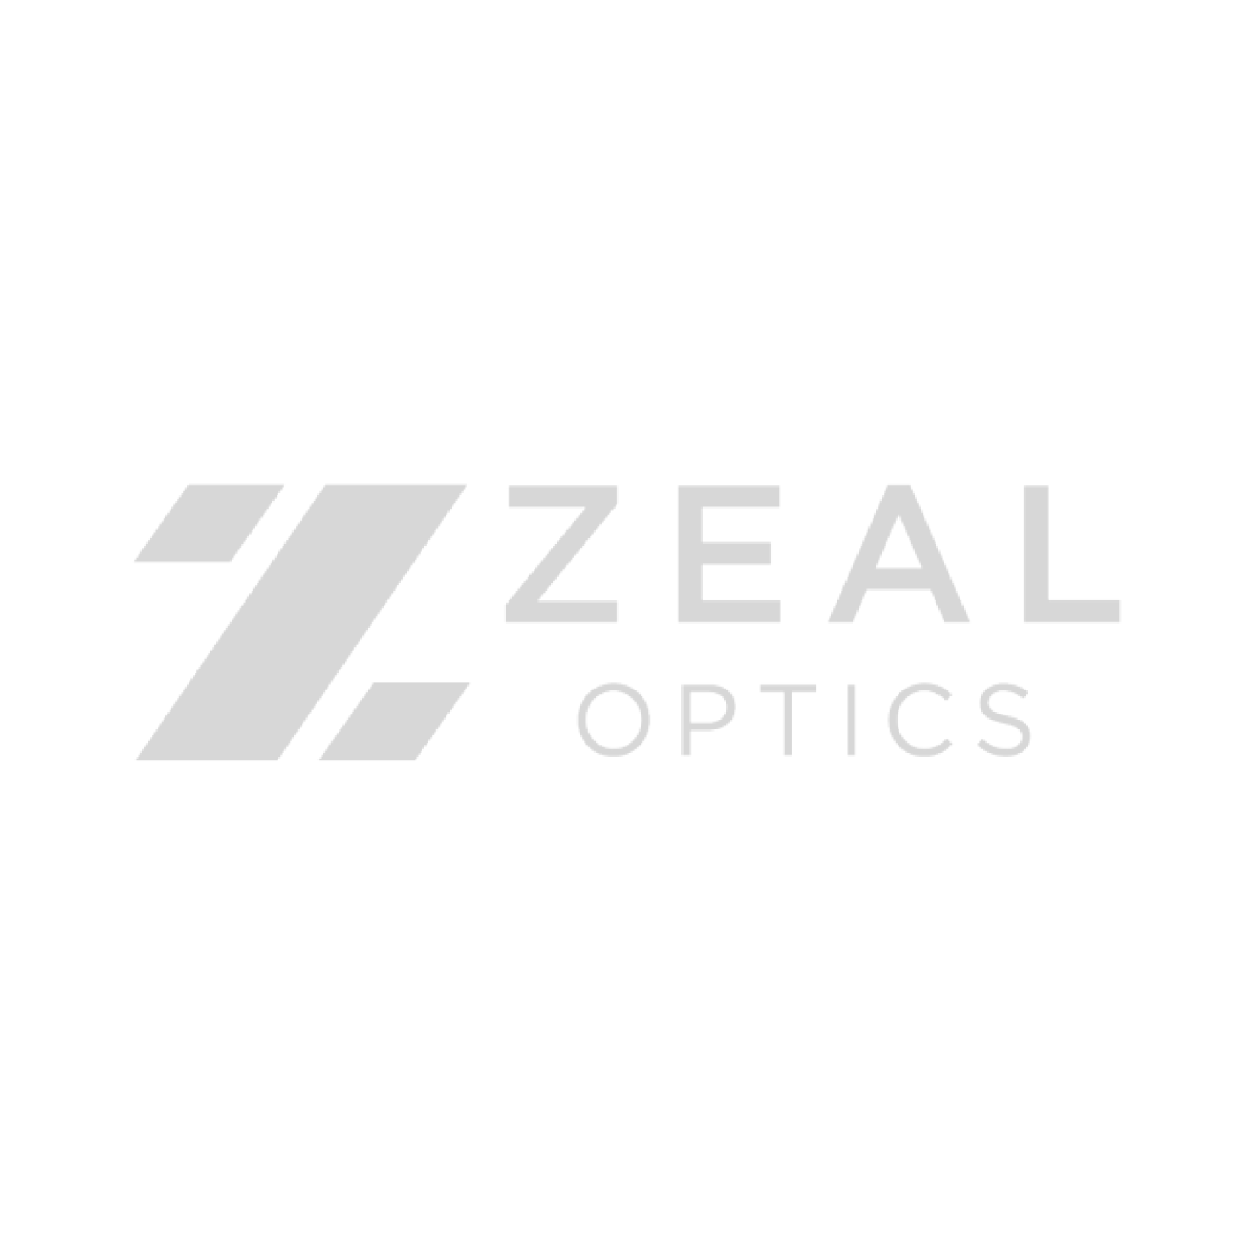 Grayscale_Client_Logo_ZEAL-01.png